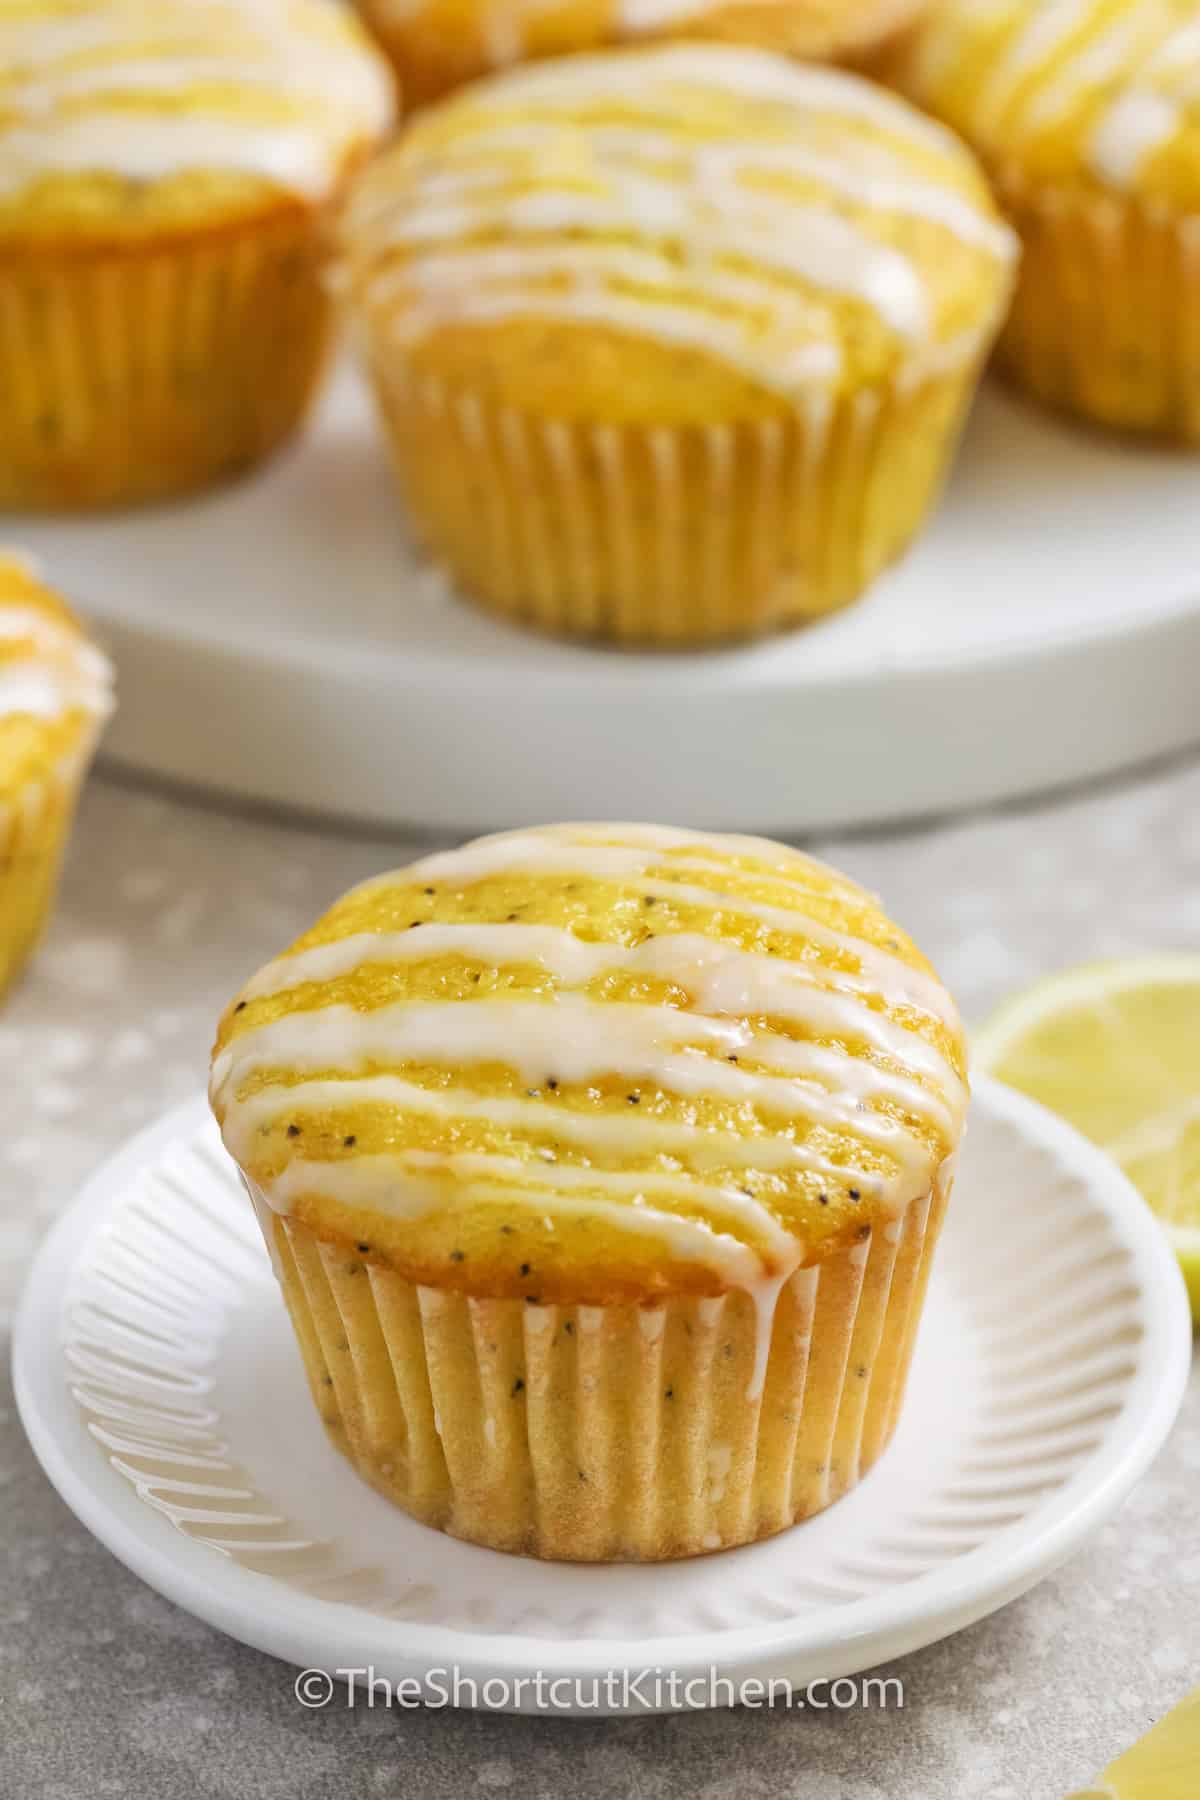 A Lemon poppyseed muffins with drizzle on a plate